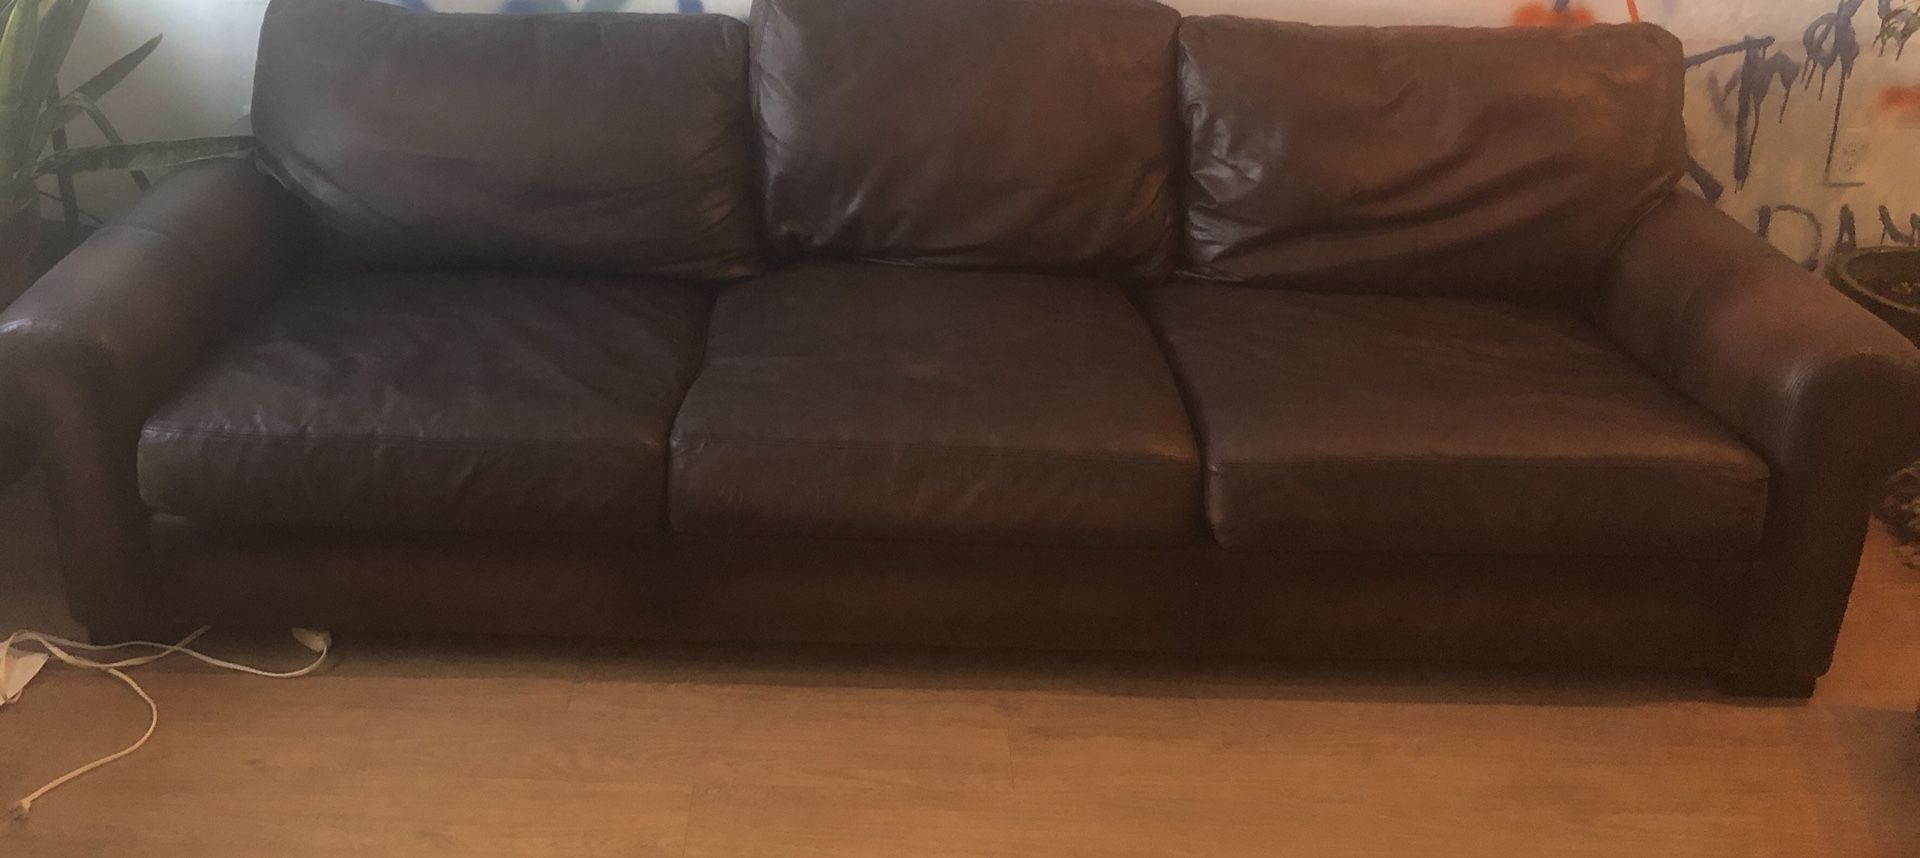 Pottery barn leather couch